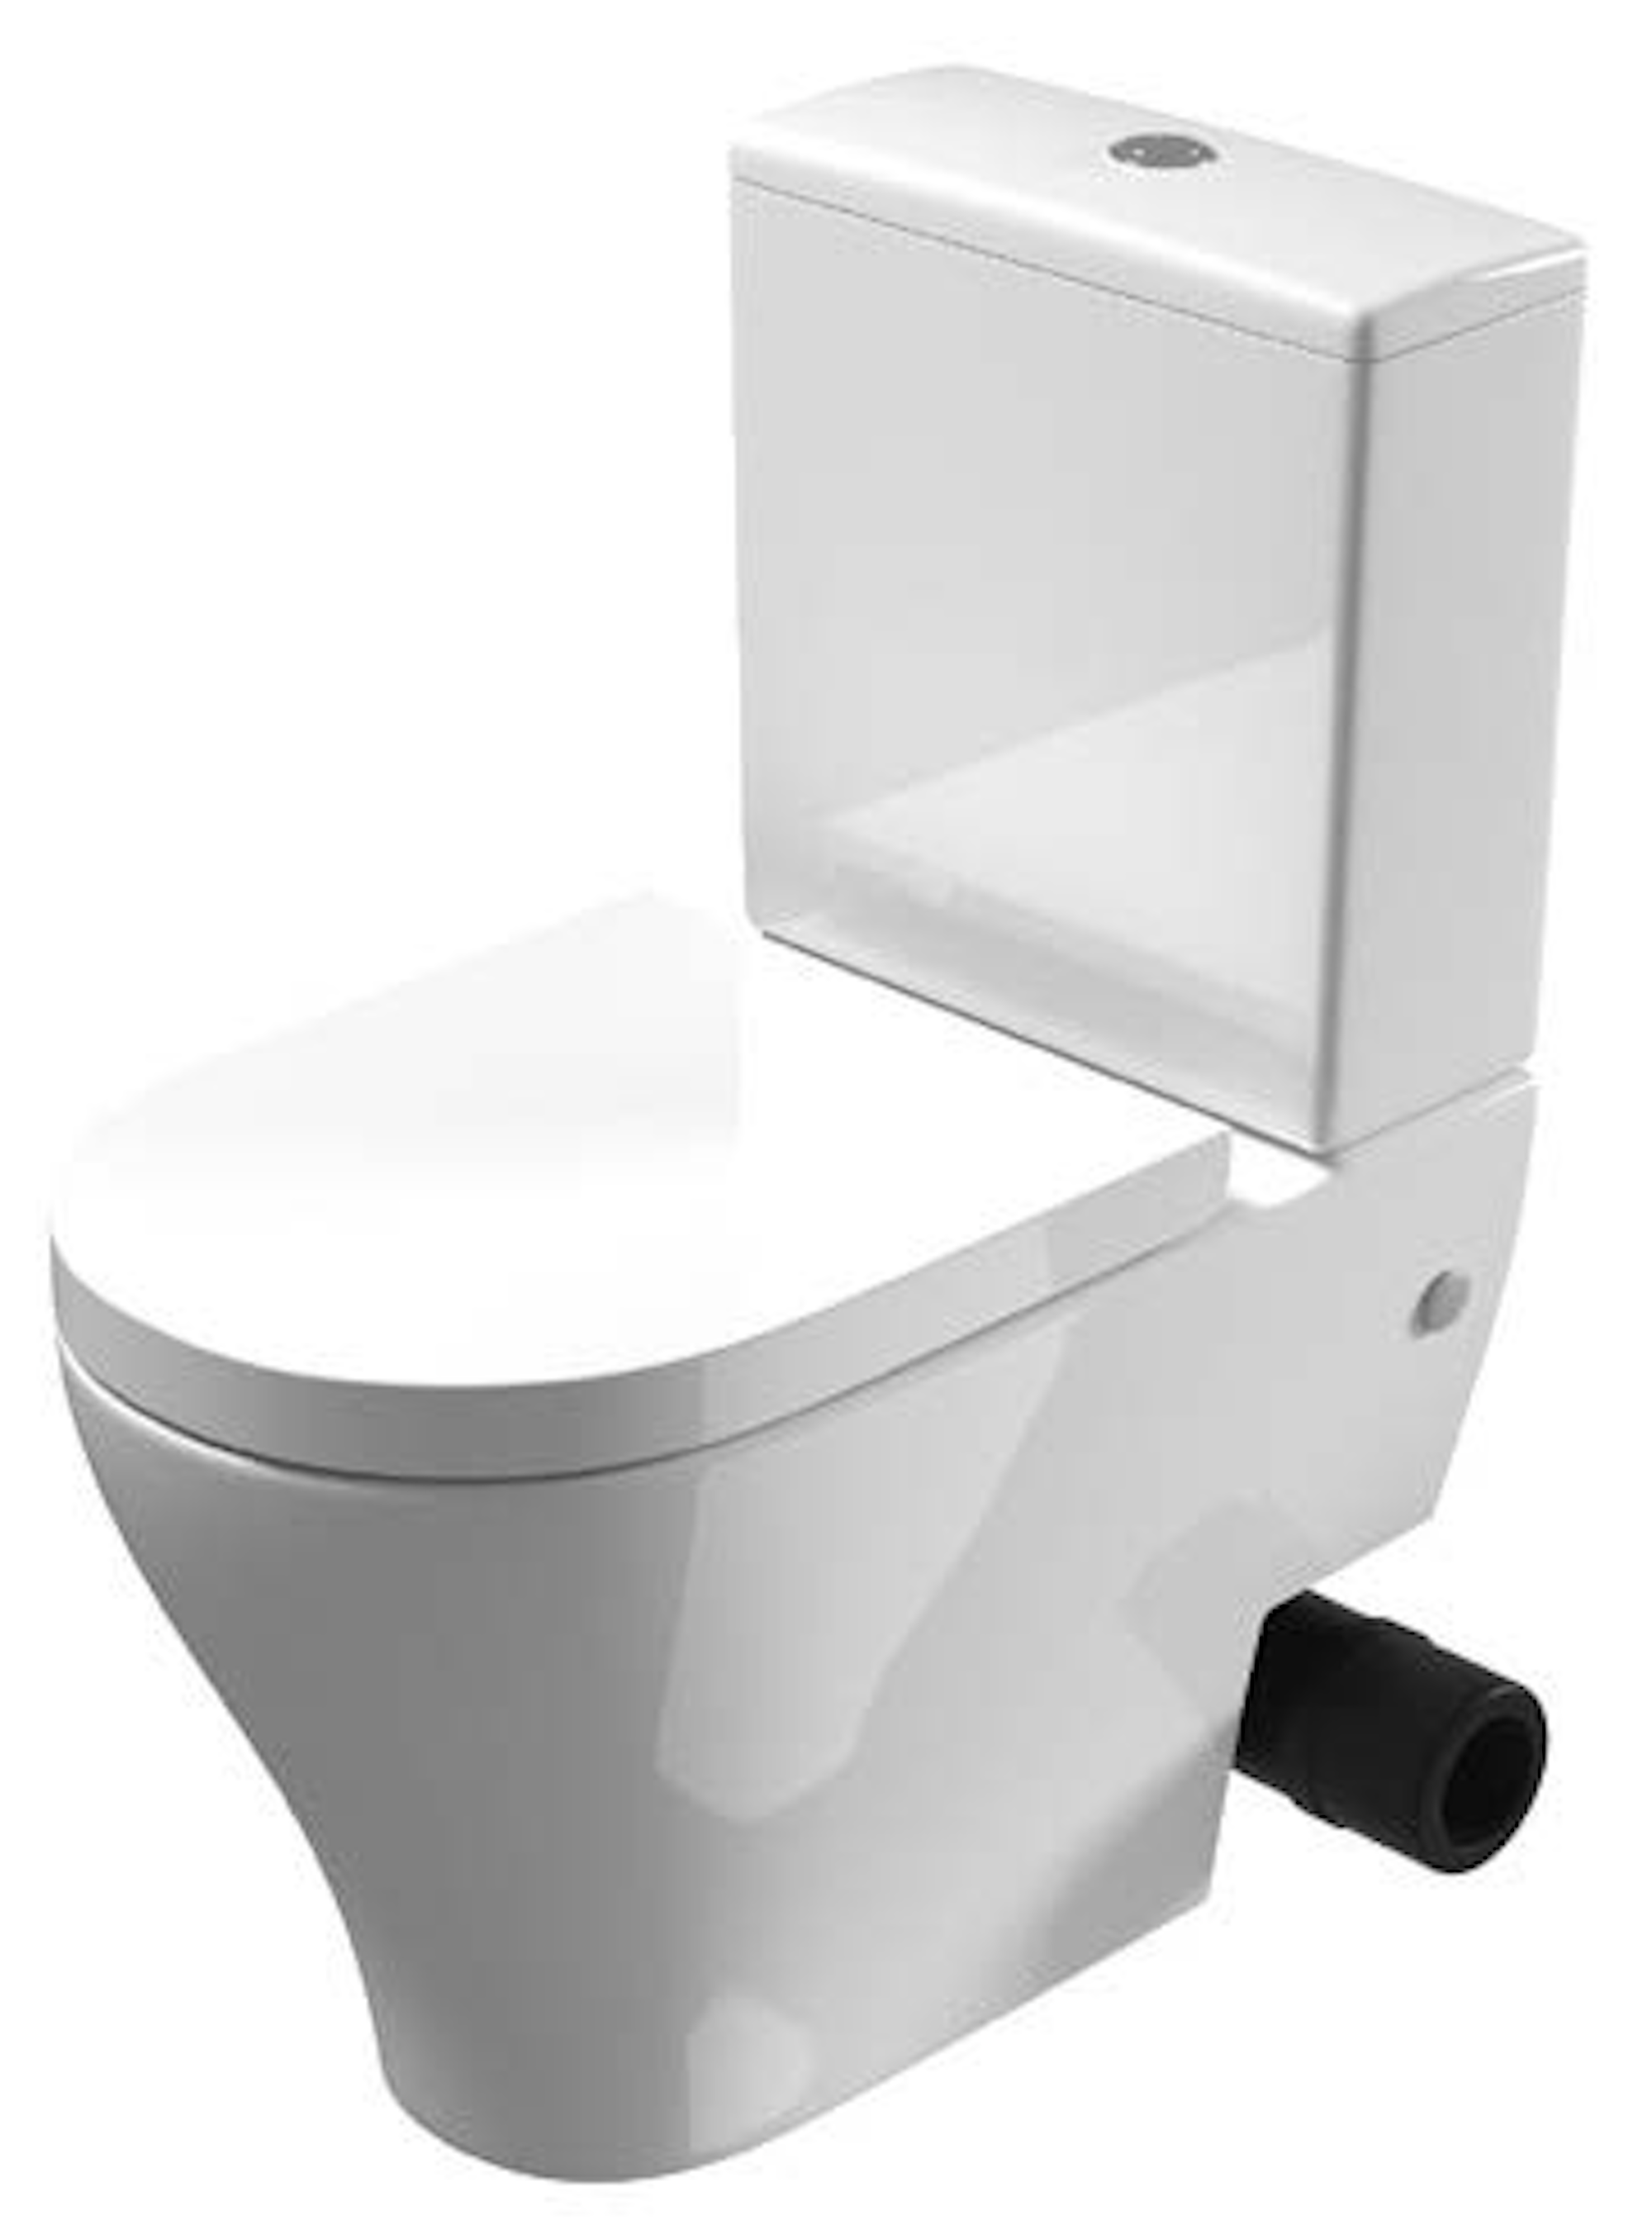 PRAGUE close coupled right hand soil exit WC pan - rimless